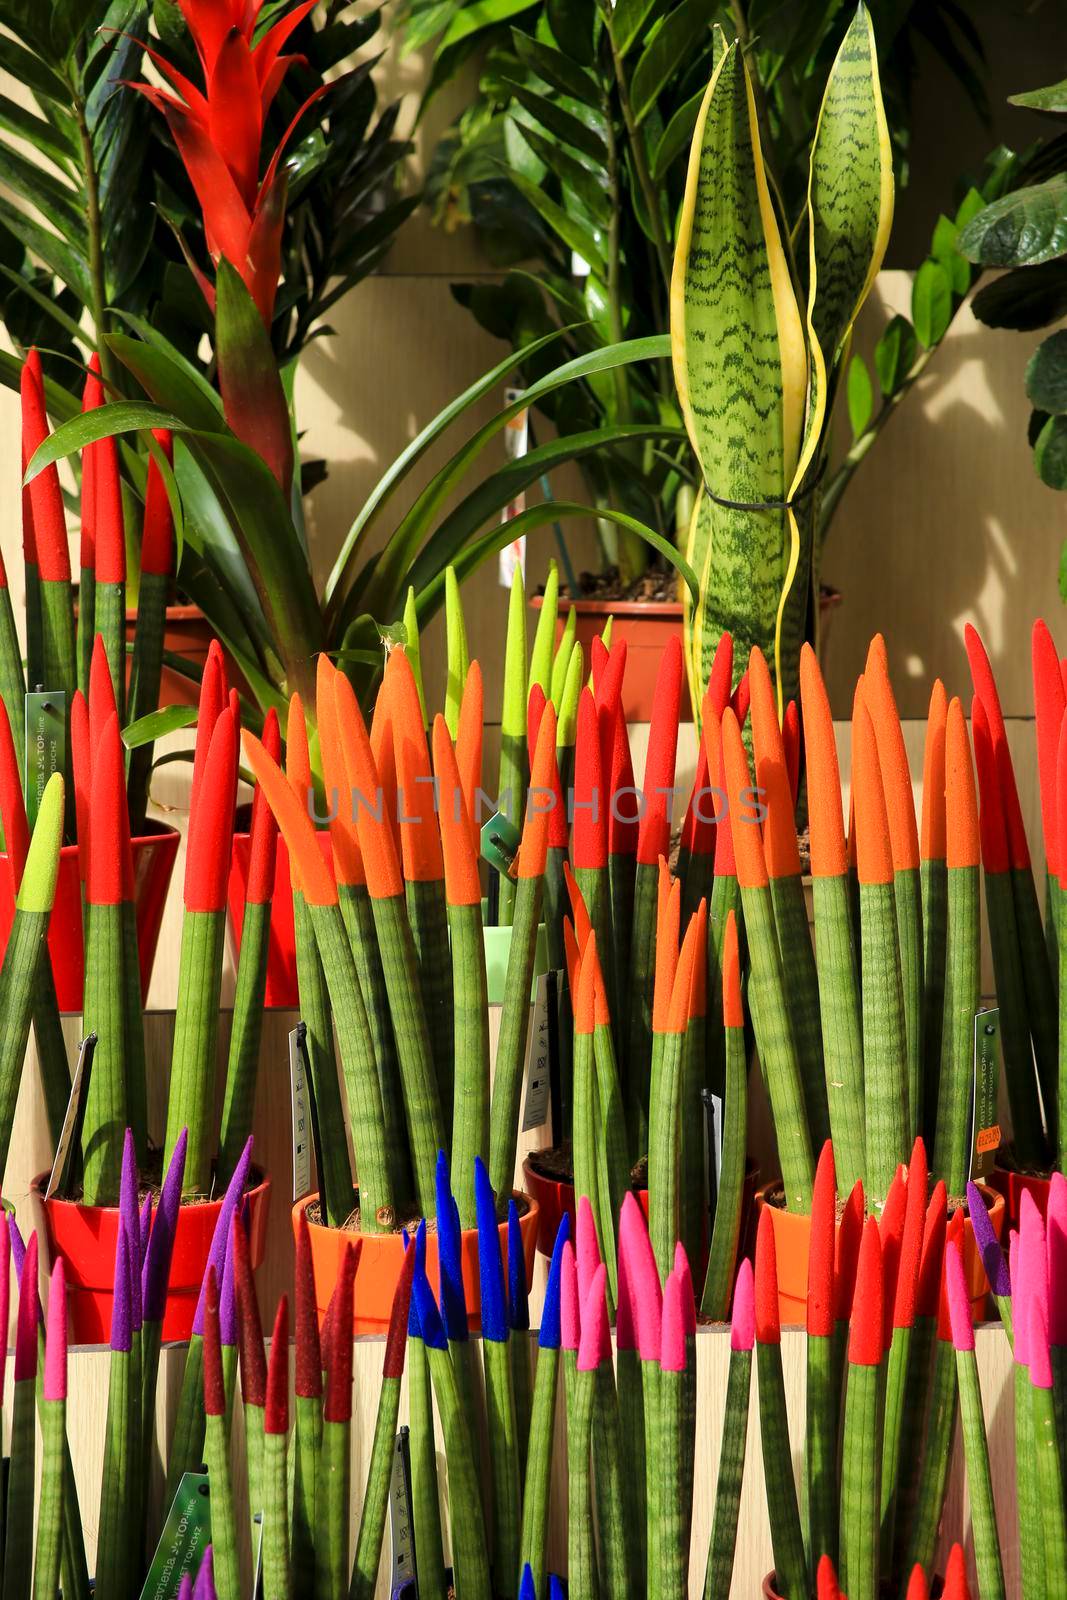 Alicante, Spain- March 28, 2022: Painted Sansevieria Cylindrica for sale at a market stall in Spain